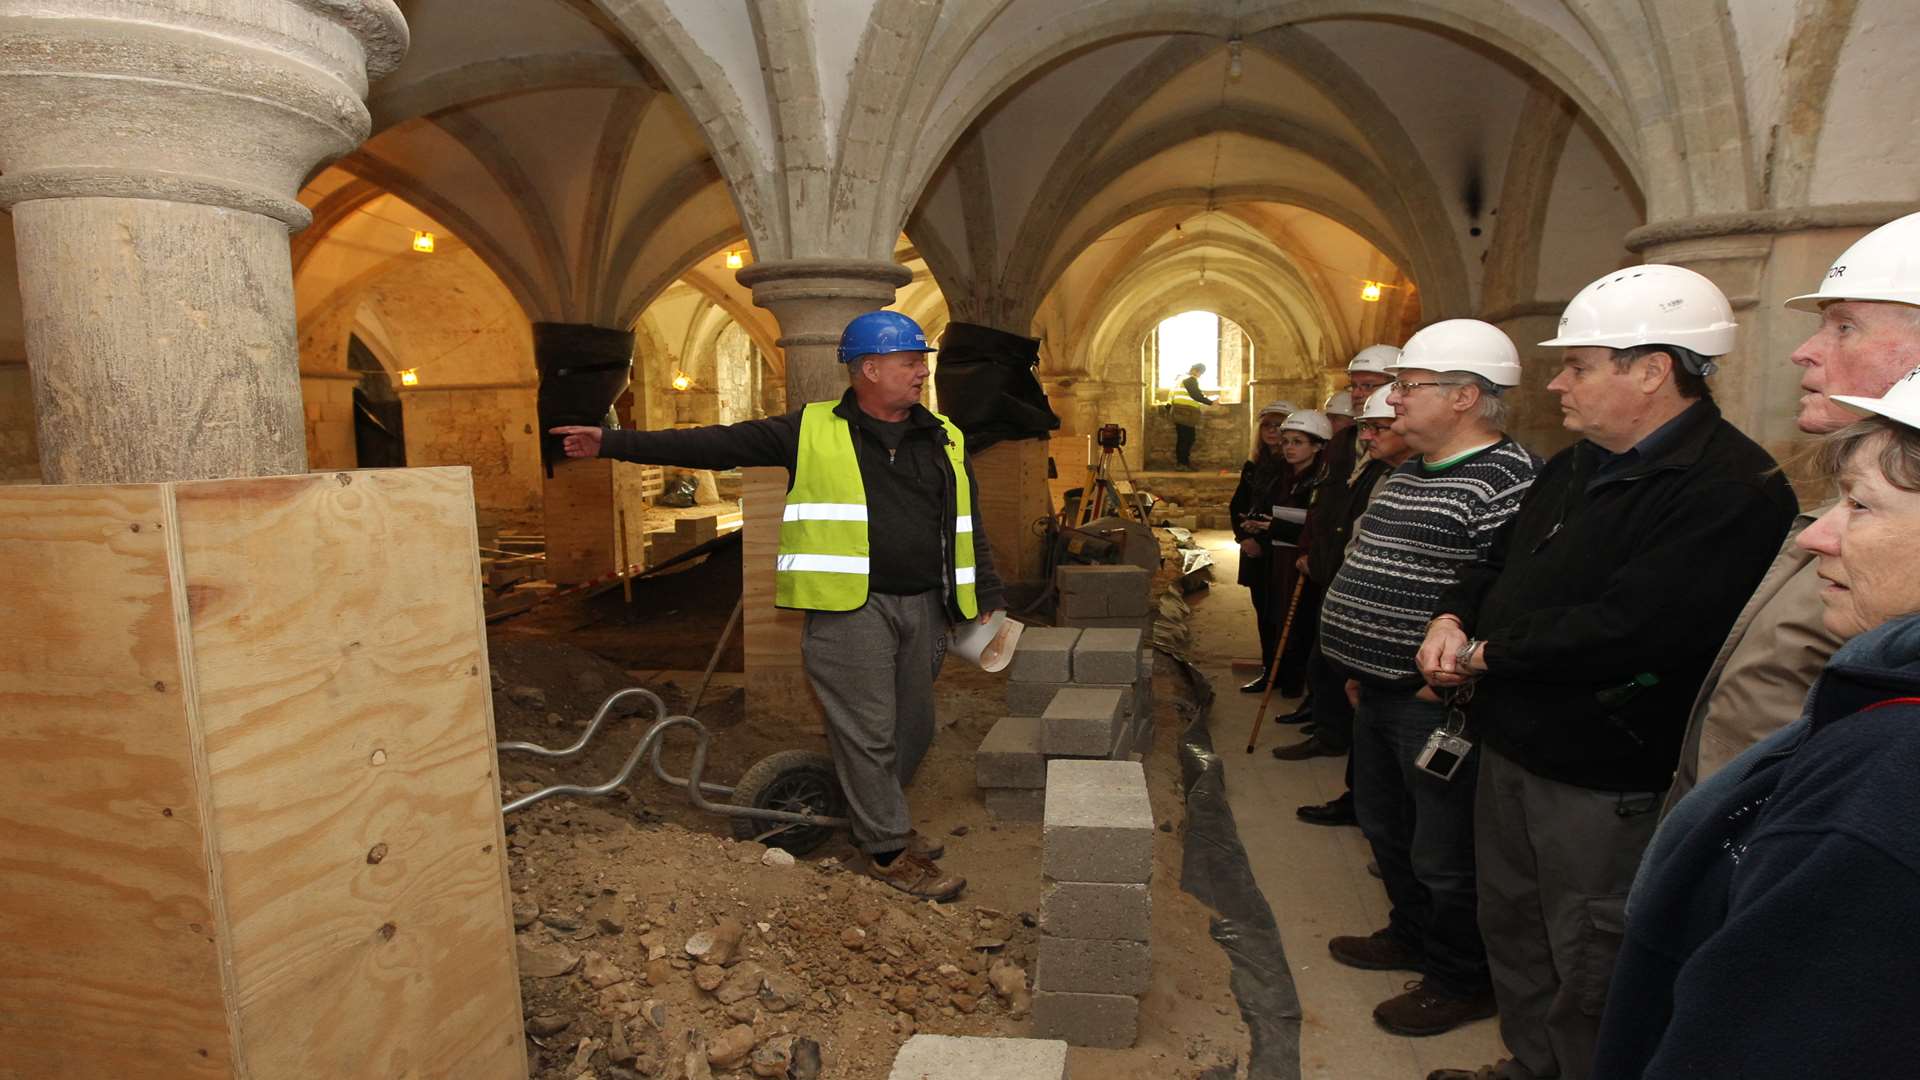 Graham Keevill, Cathedral Archaeologist talks to a group of people on a tour of the crypts of Rochester cathedral showing a Roman floor.